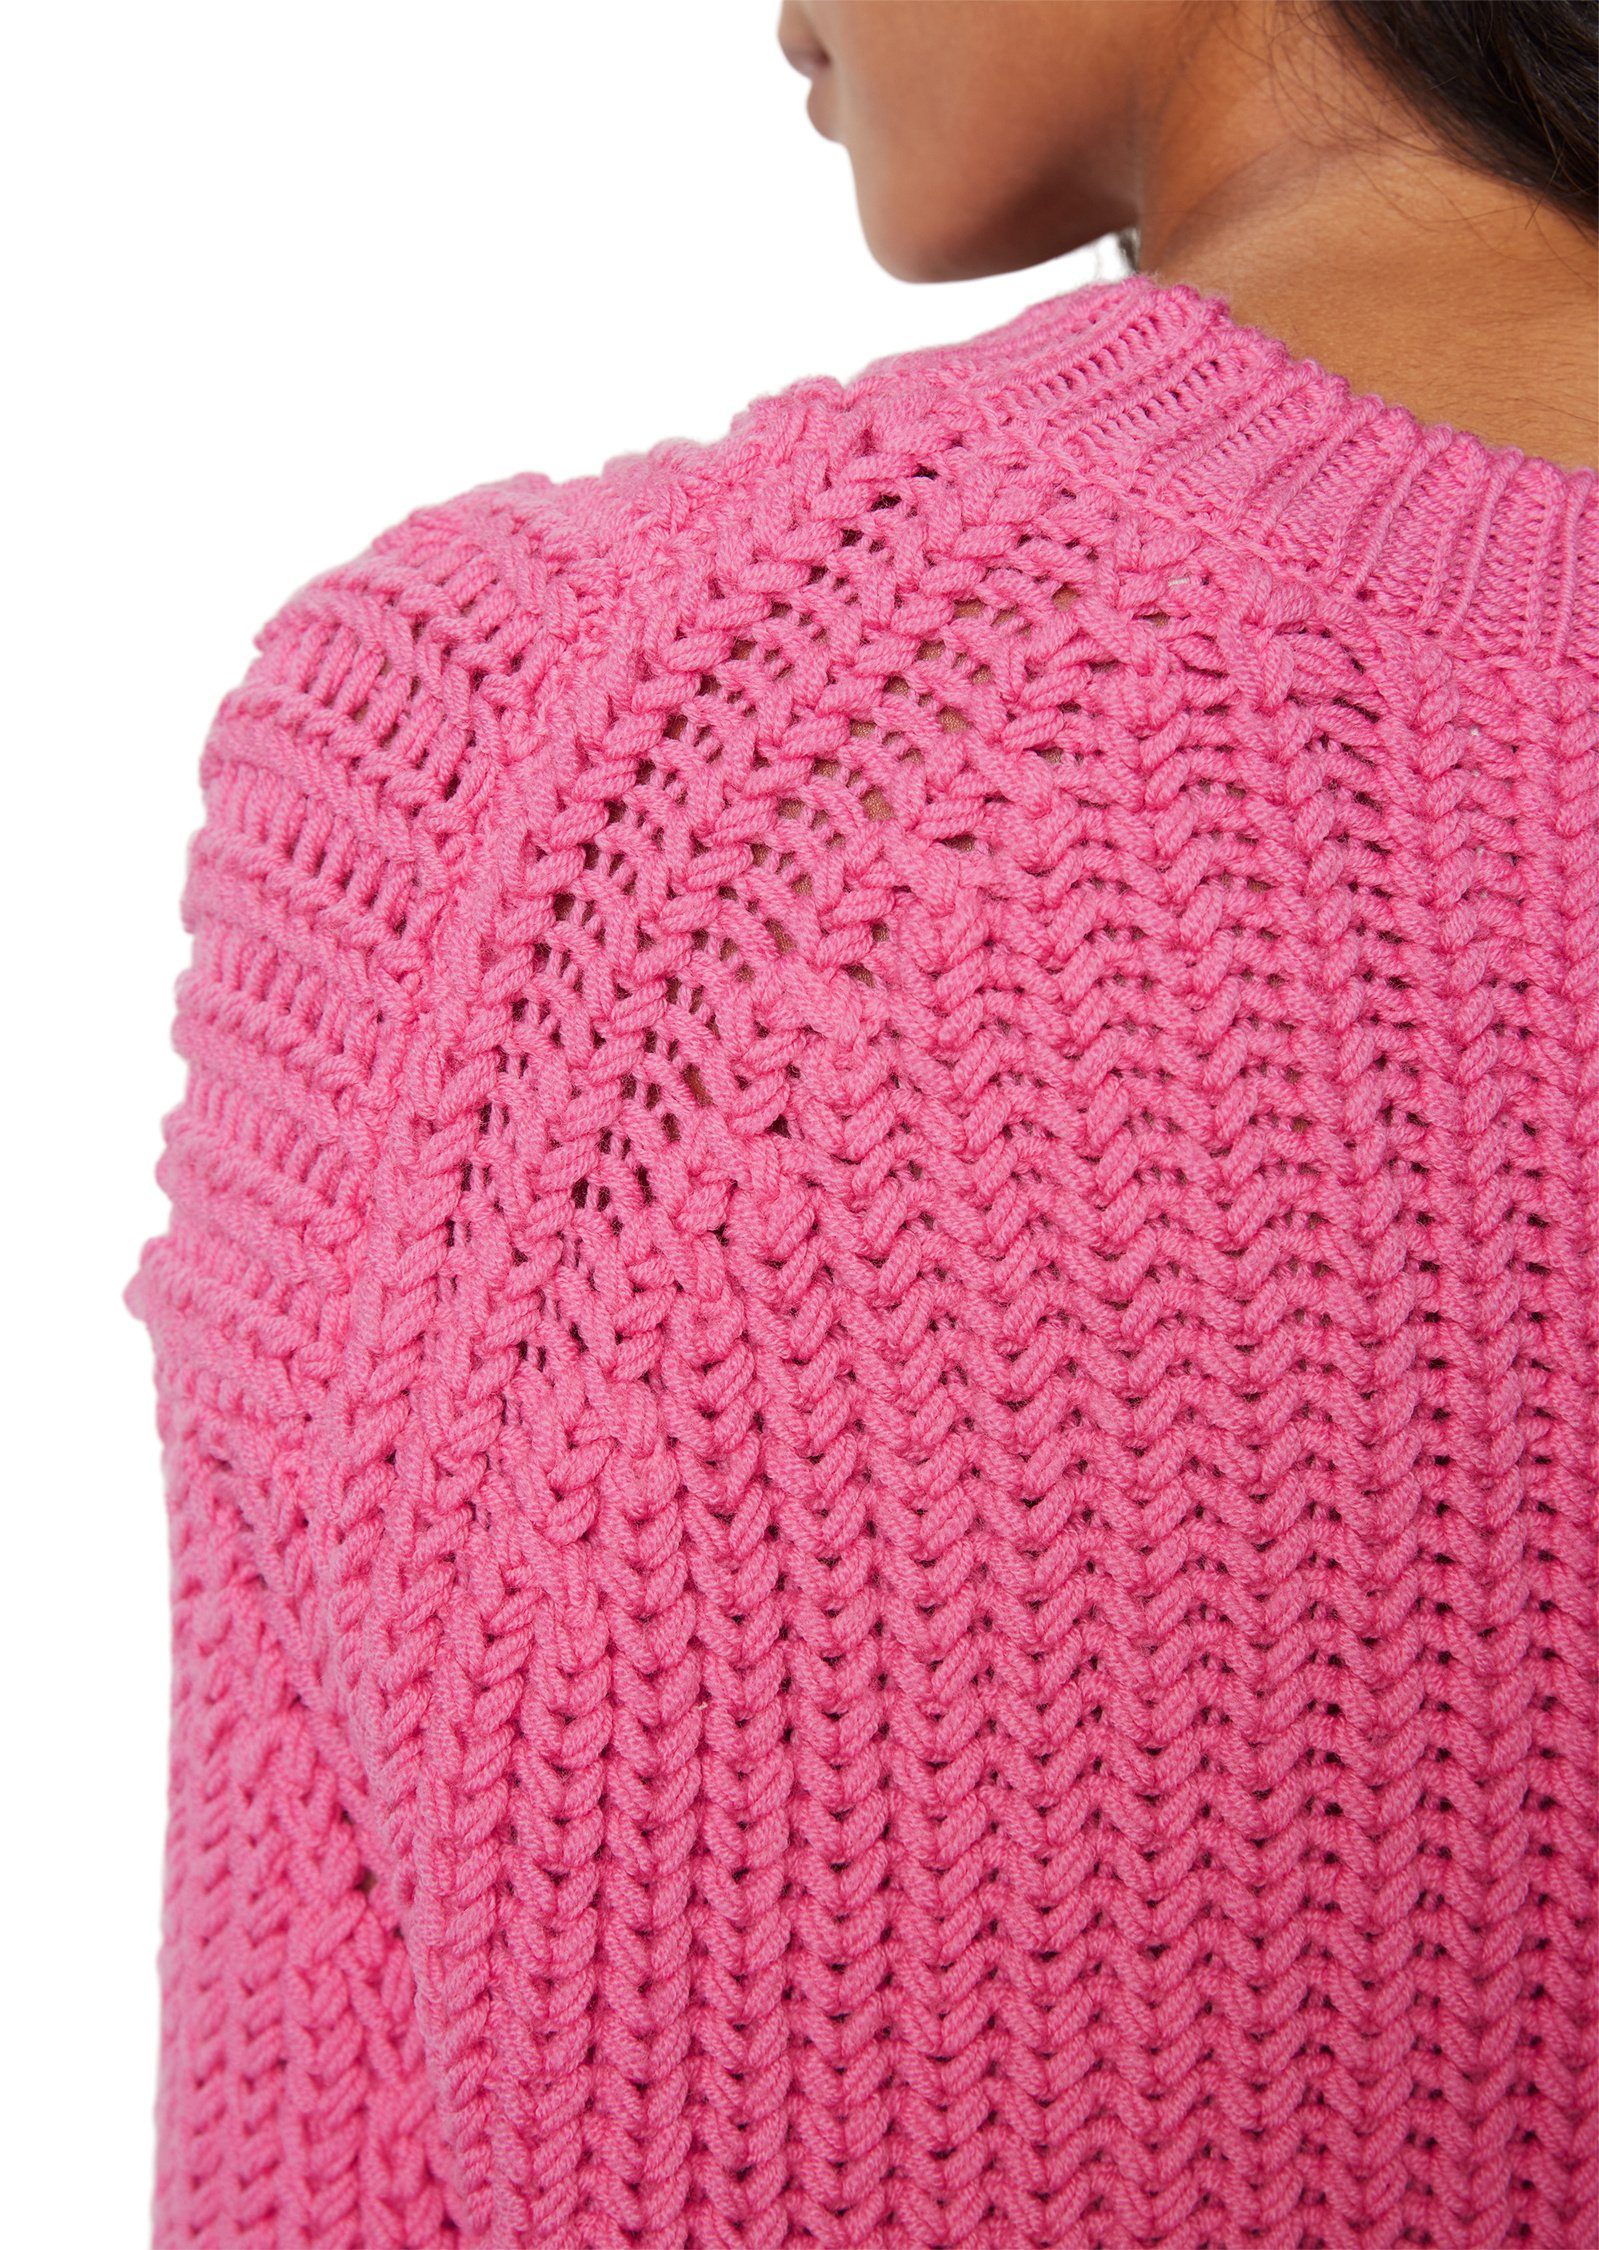 Marc O'Polo Strickpullover softer Schurwolle rosa aus